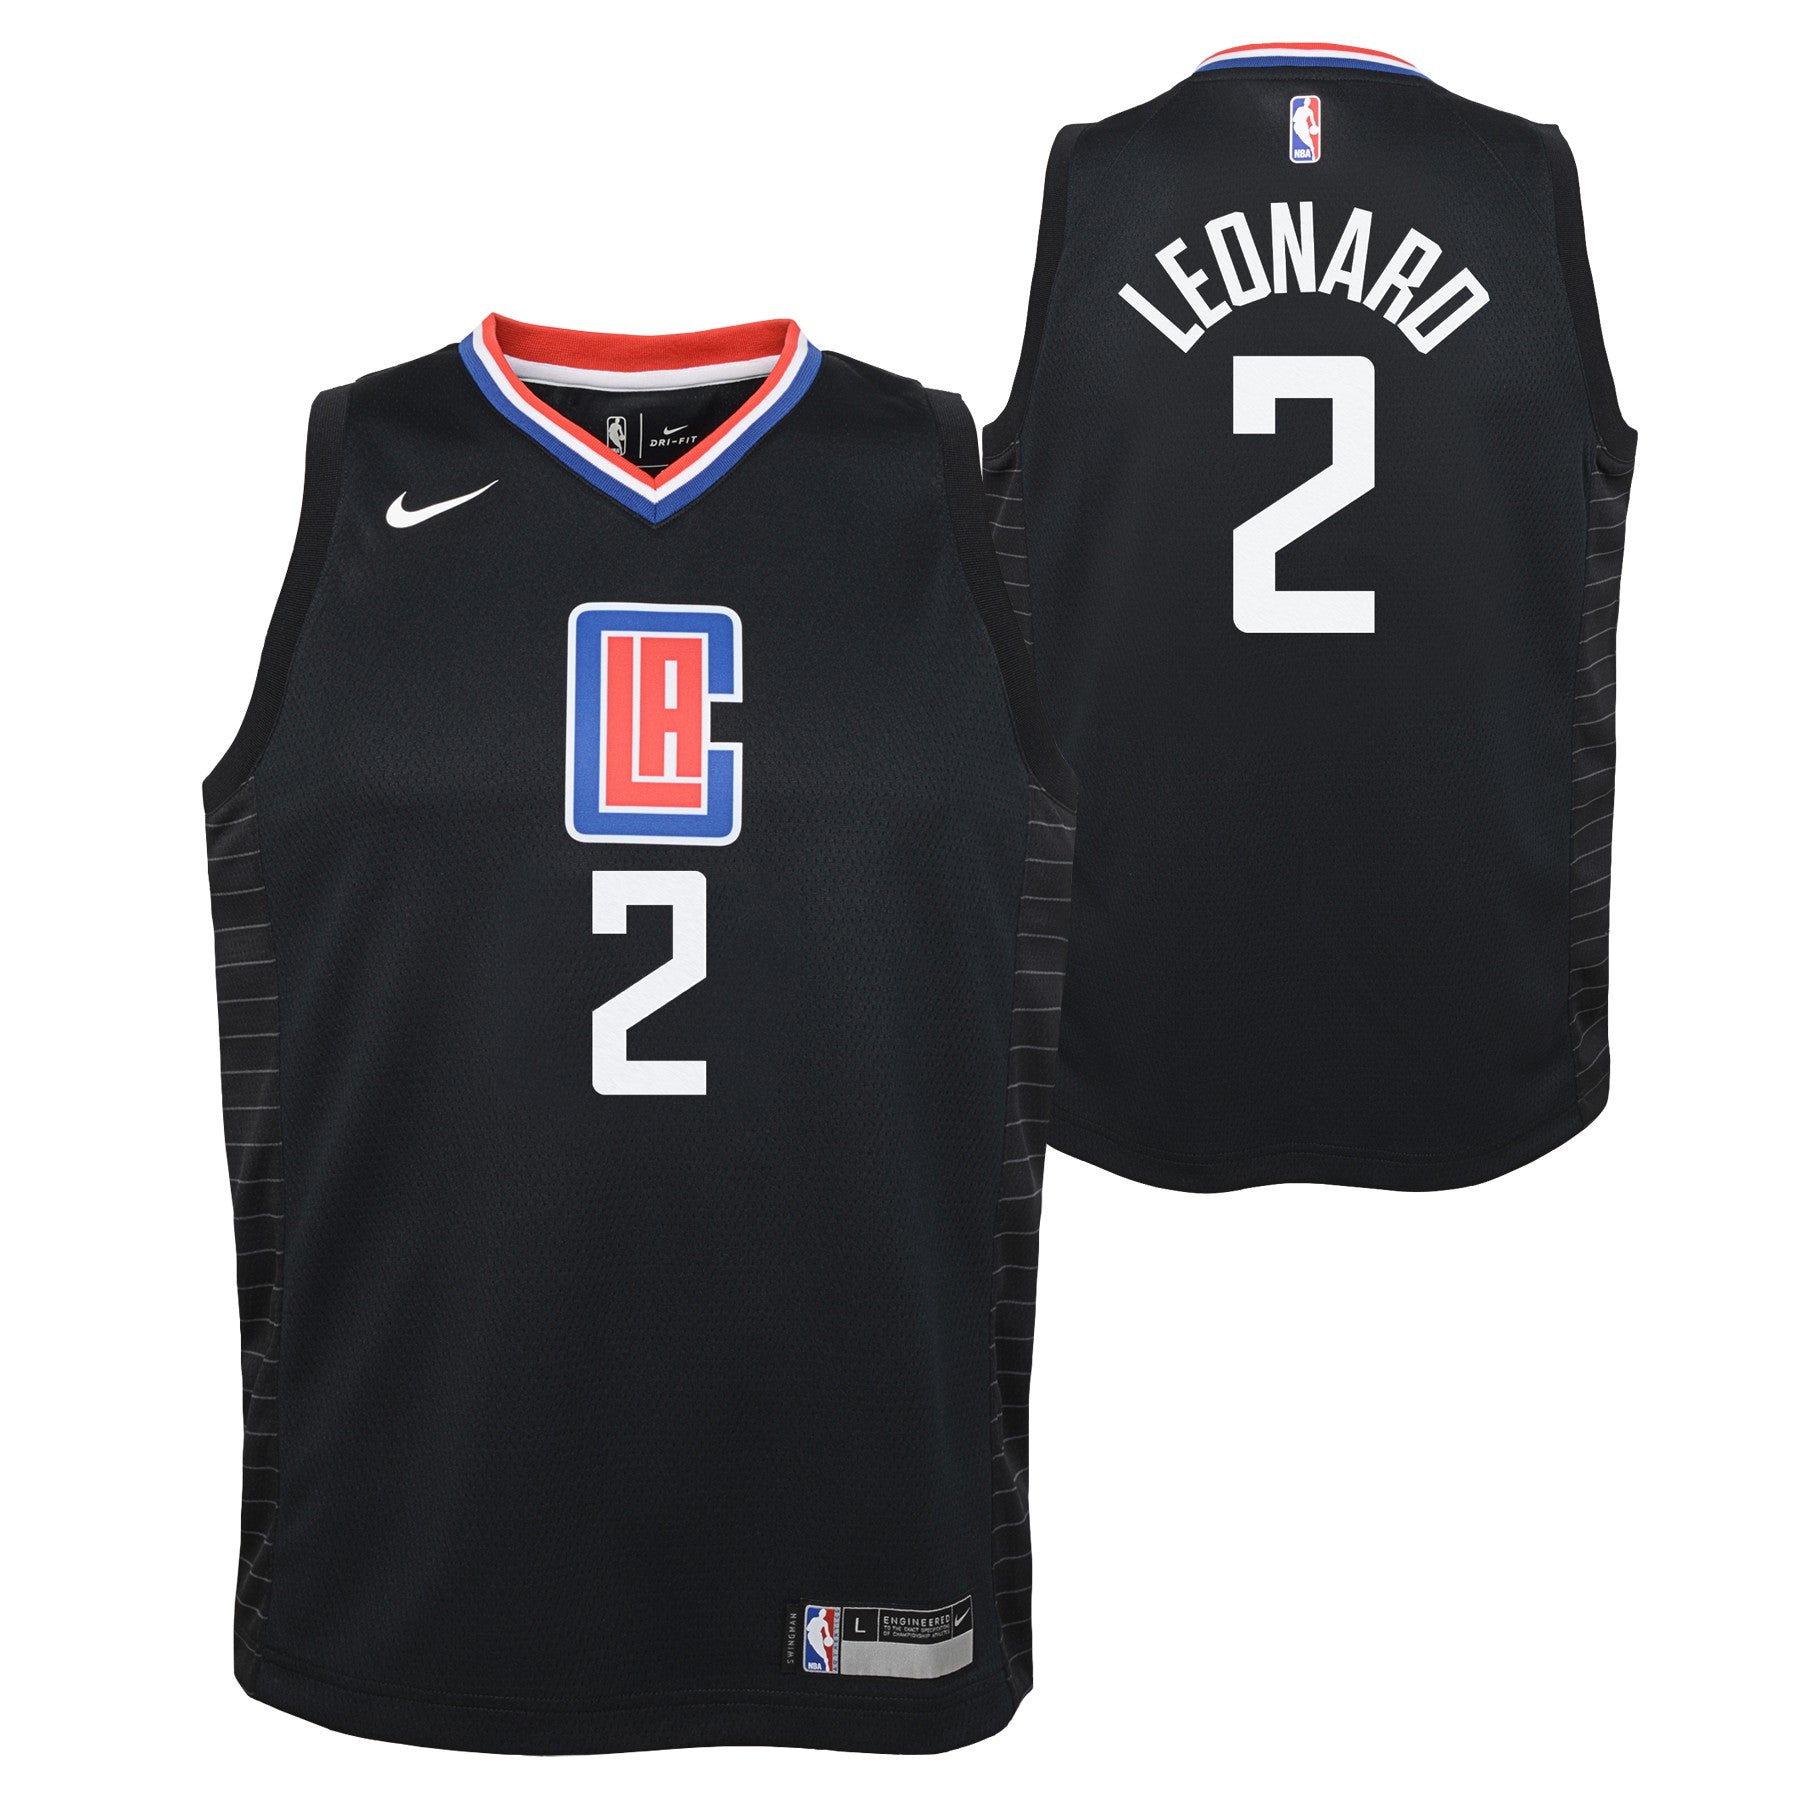 Nike Los Angeles Clippers NBA Jerseys for sale